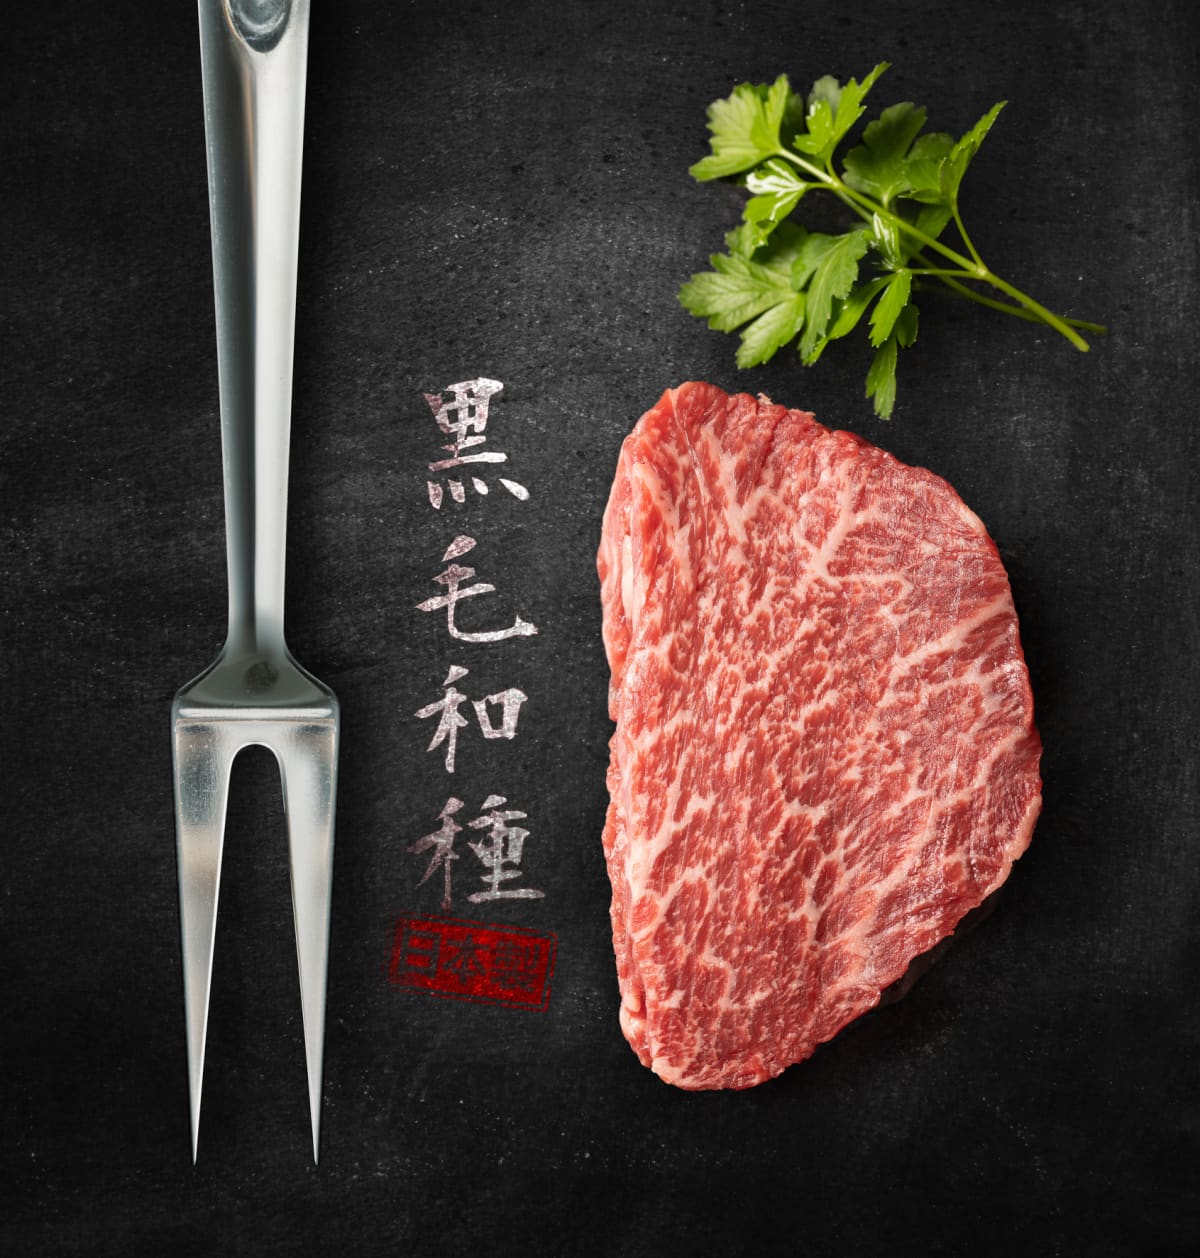 Kobe beef filet with fork and japanese text on black background
In Japan, the word "Wagyu" ( 和牛 ) means "Japanese Cow".
( 黒毛和種 ): Japanese Black ( Black-haired Japanese cow )
Kuroge Washu is unique in the beef world, and in the entire animal kingdom, for its genetic predisposition to developing fine-grained, speckled fat marbling inside the meat itself.